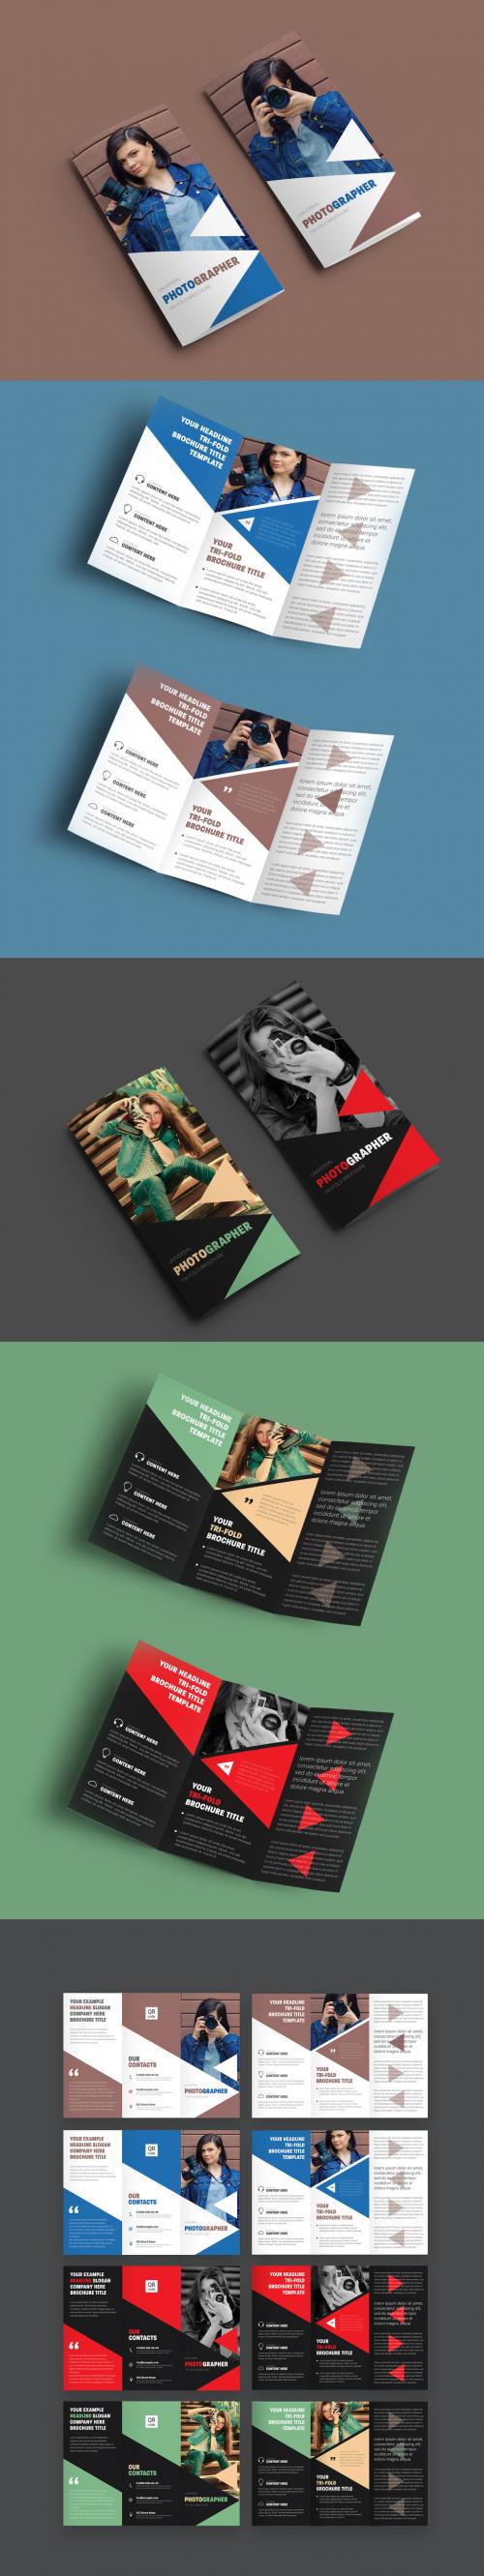 Adobe Stock - Business Brochure with Triangle Elements - 210712802